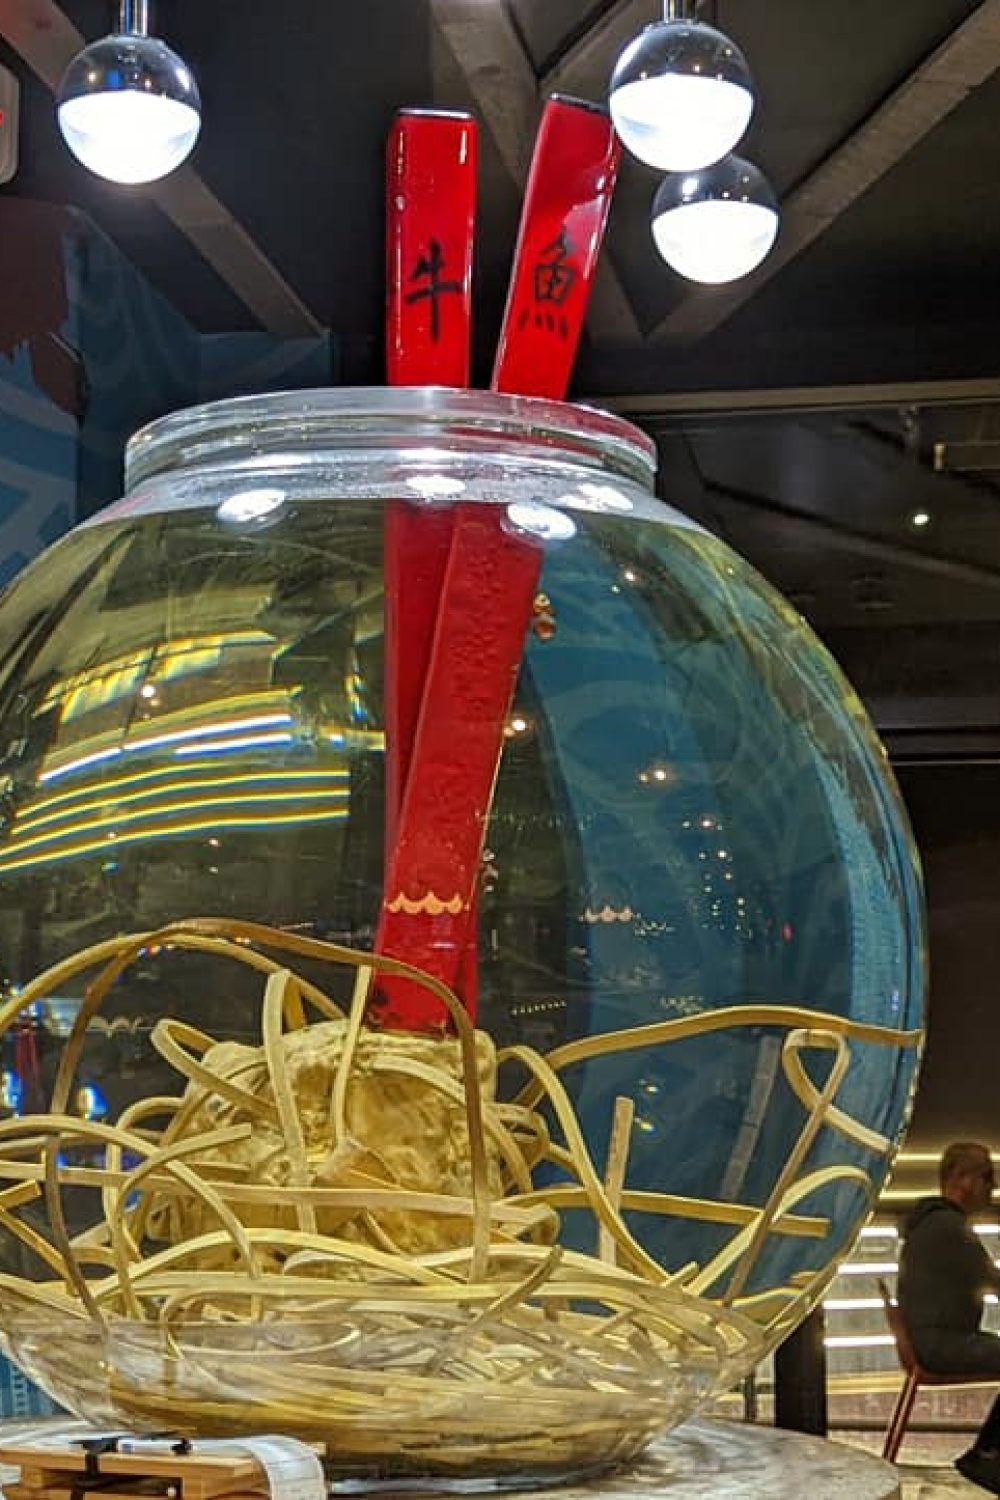 Decor at Cowfish.  Large fish bowl with chopsticks and noodles